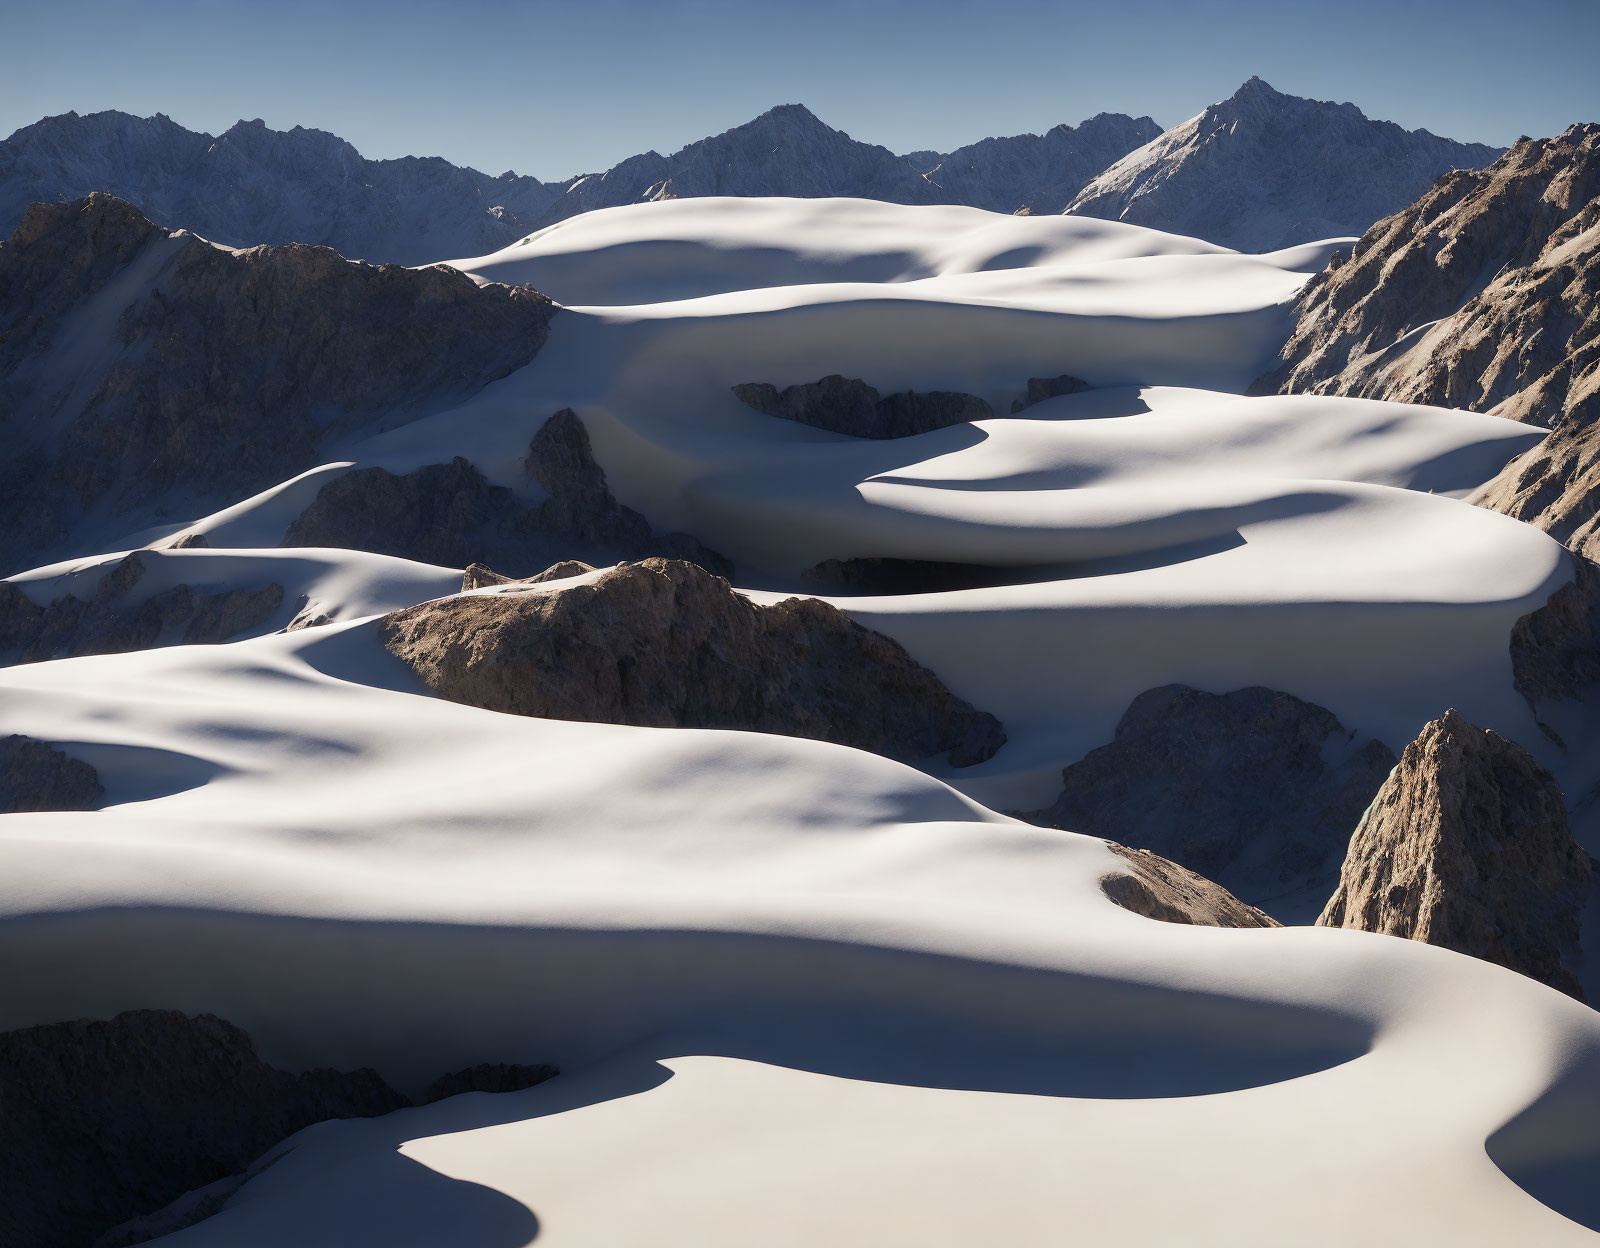 Snow-covered sand dunes against rugged mountain backdrop